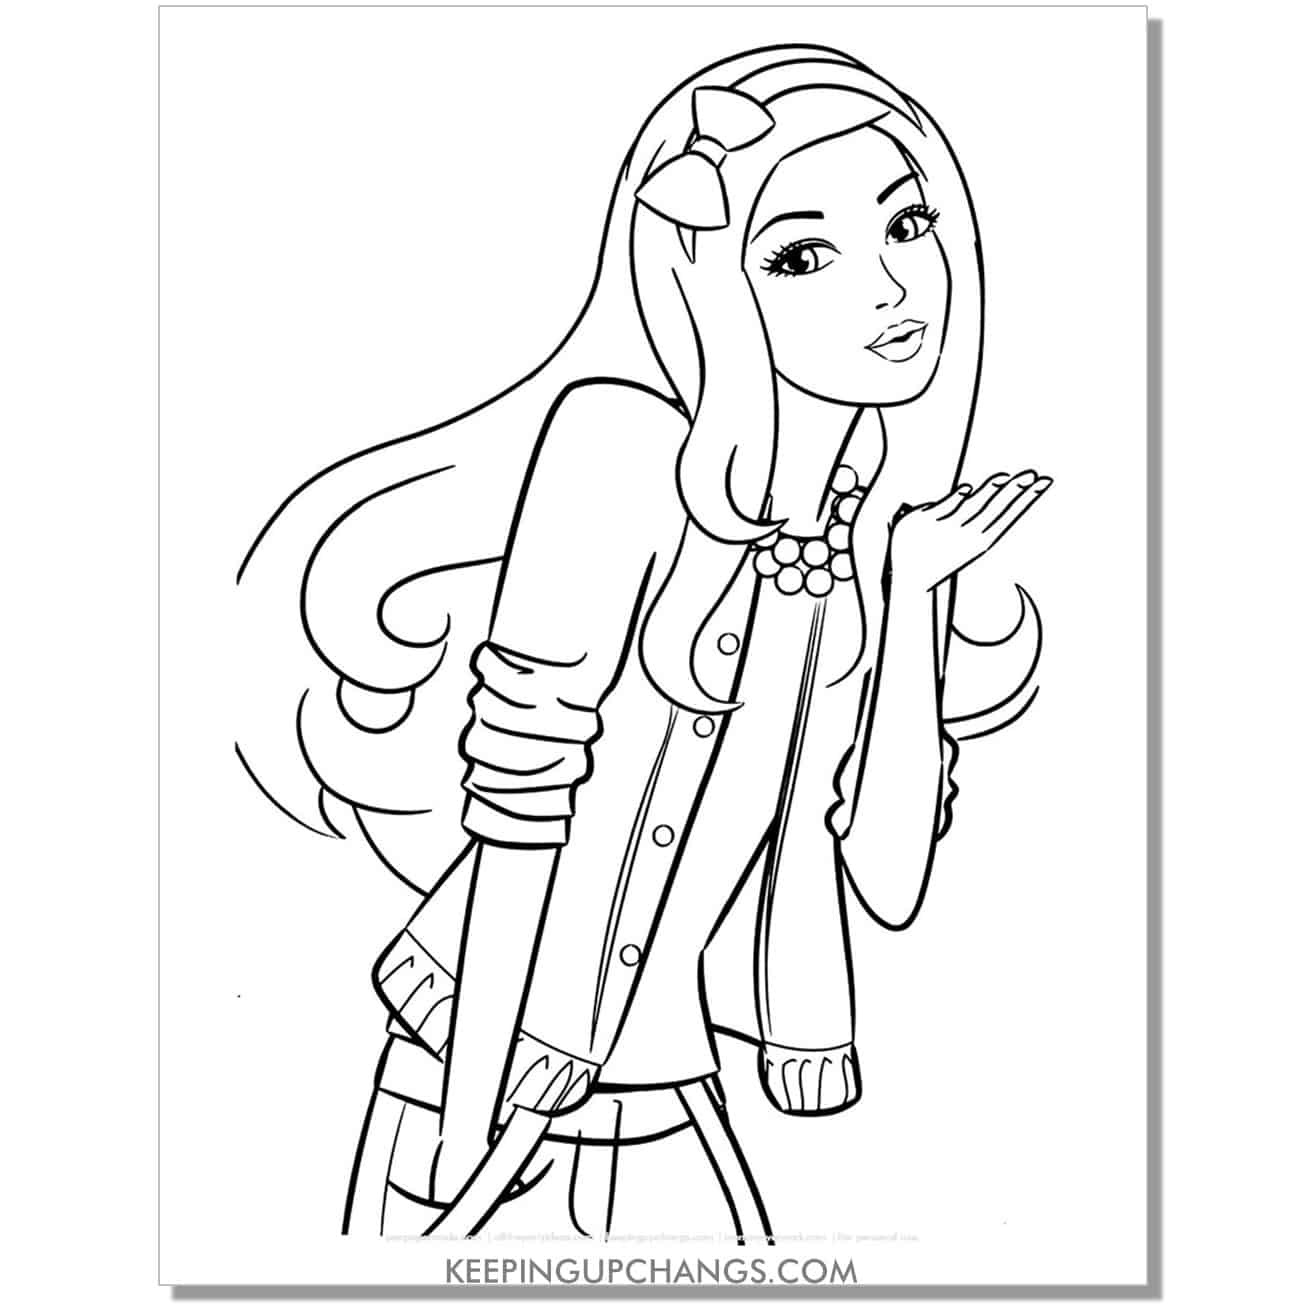 barbie blowing kiss coloring page.